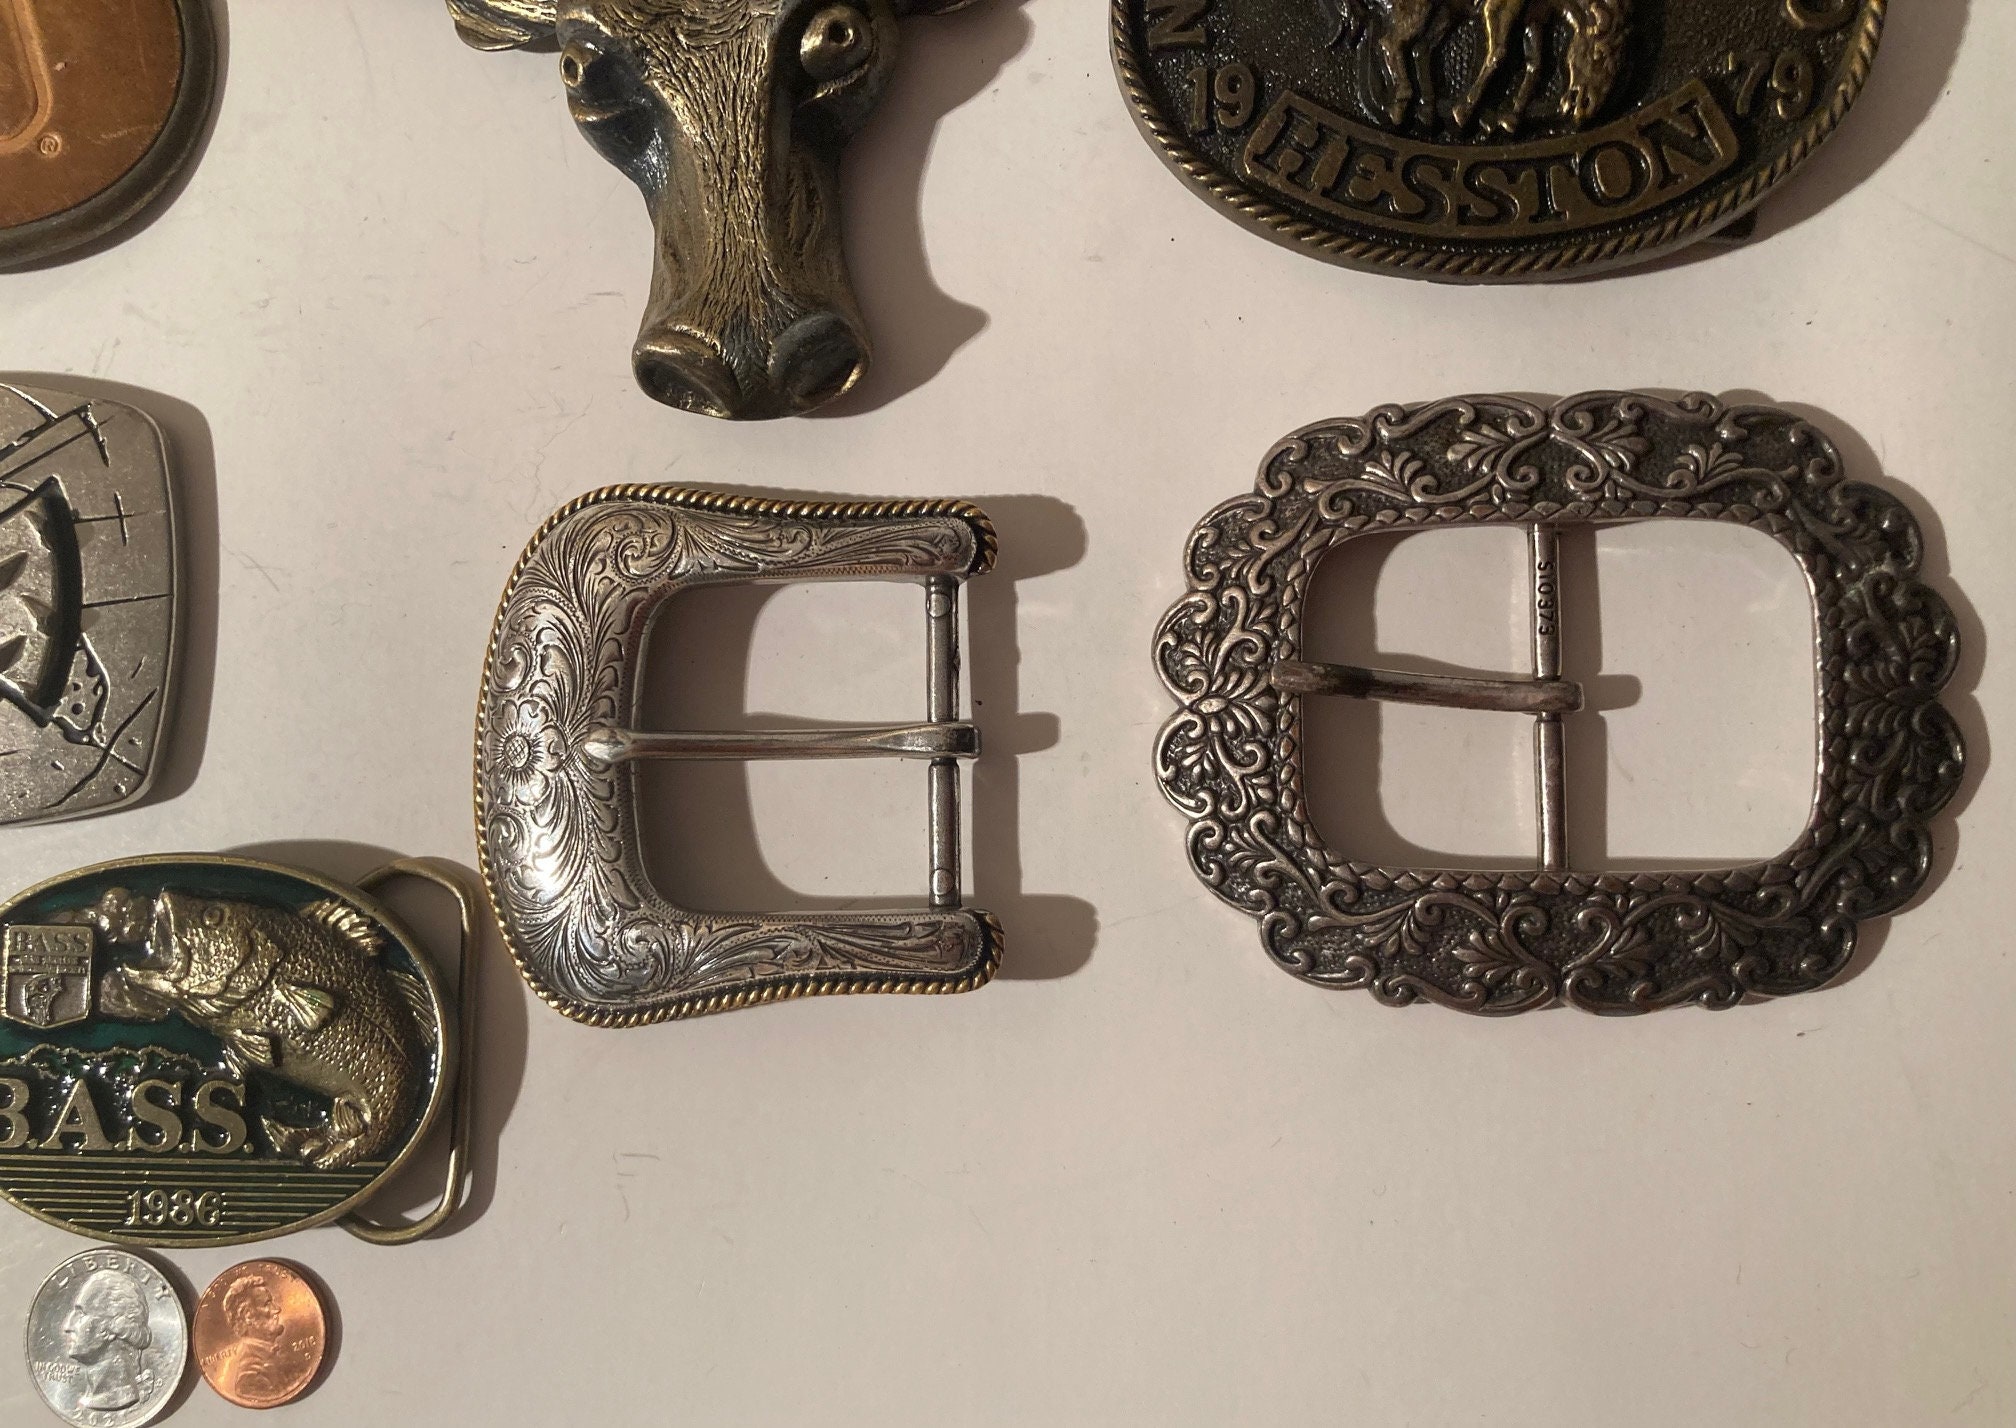 Vintage Lot of 14 Assorted Different Belt Buckles, Texas, Horse, Longhorn,  Country & Western, Western Wear, Made in USA, Resell, for Belts 